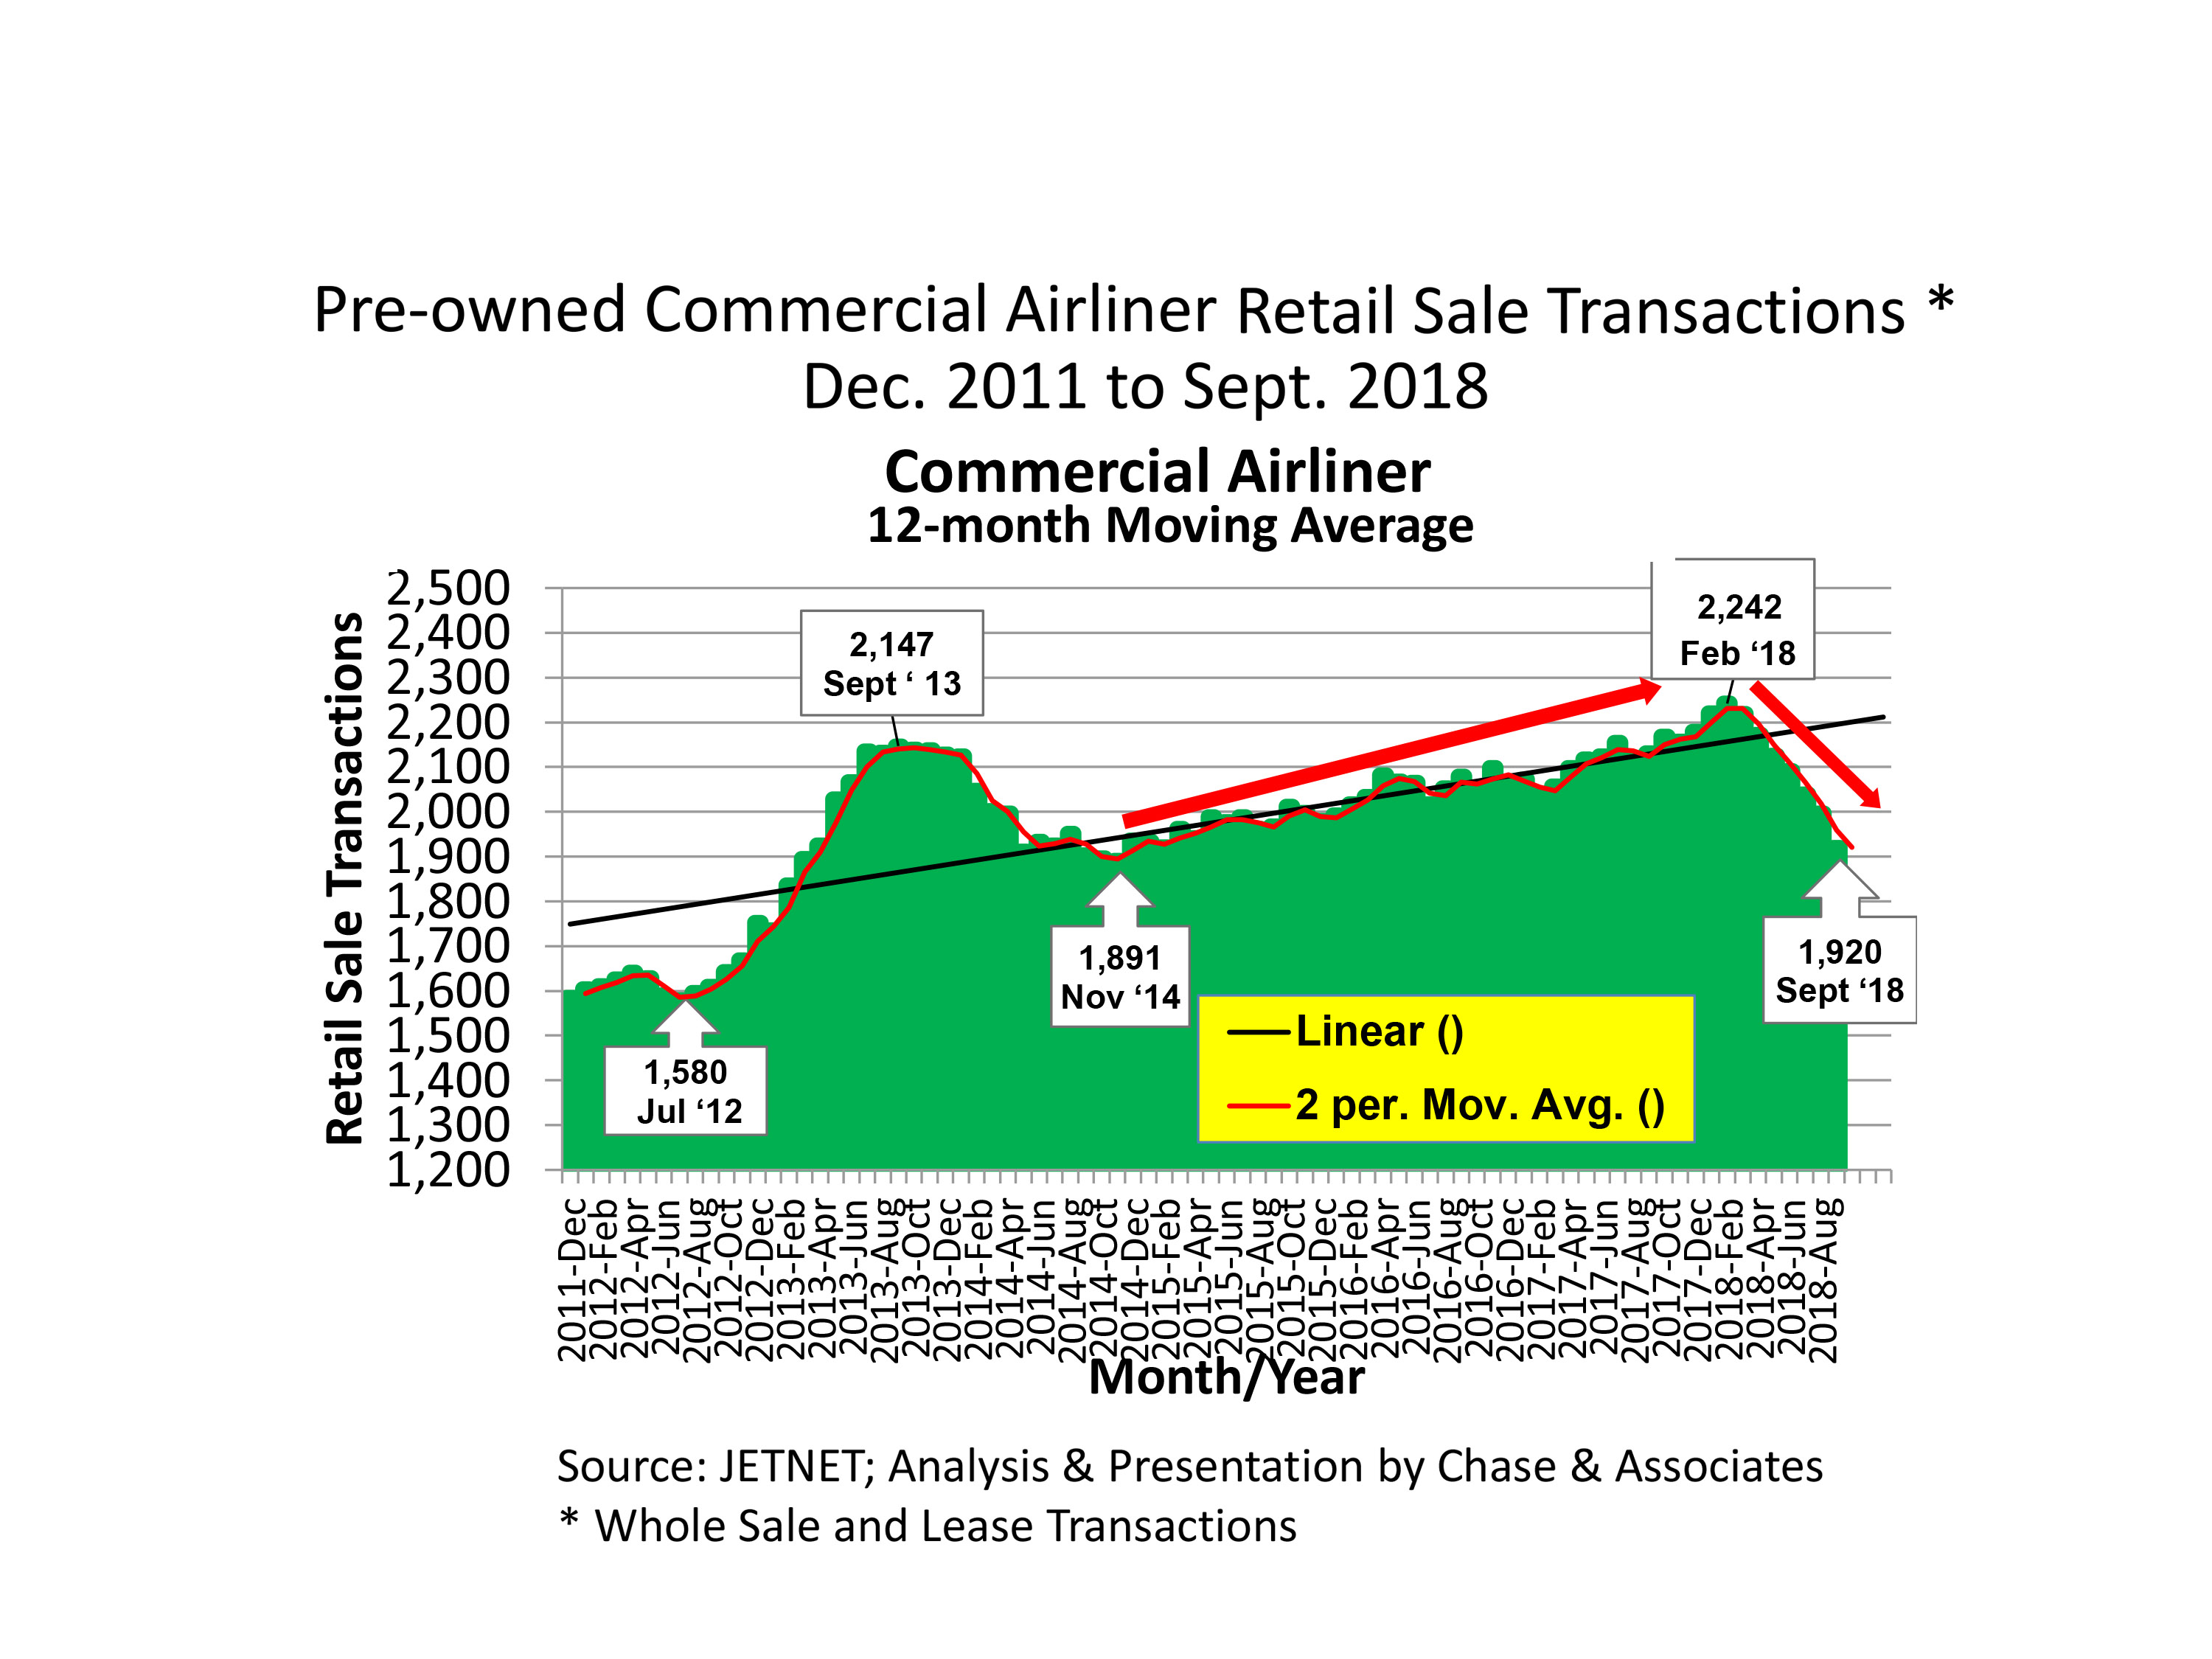 Chart C - Pre-Owned Commercial Airliner Retail Sale Transactions, Dec. 2011-Sept. 2018